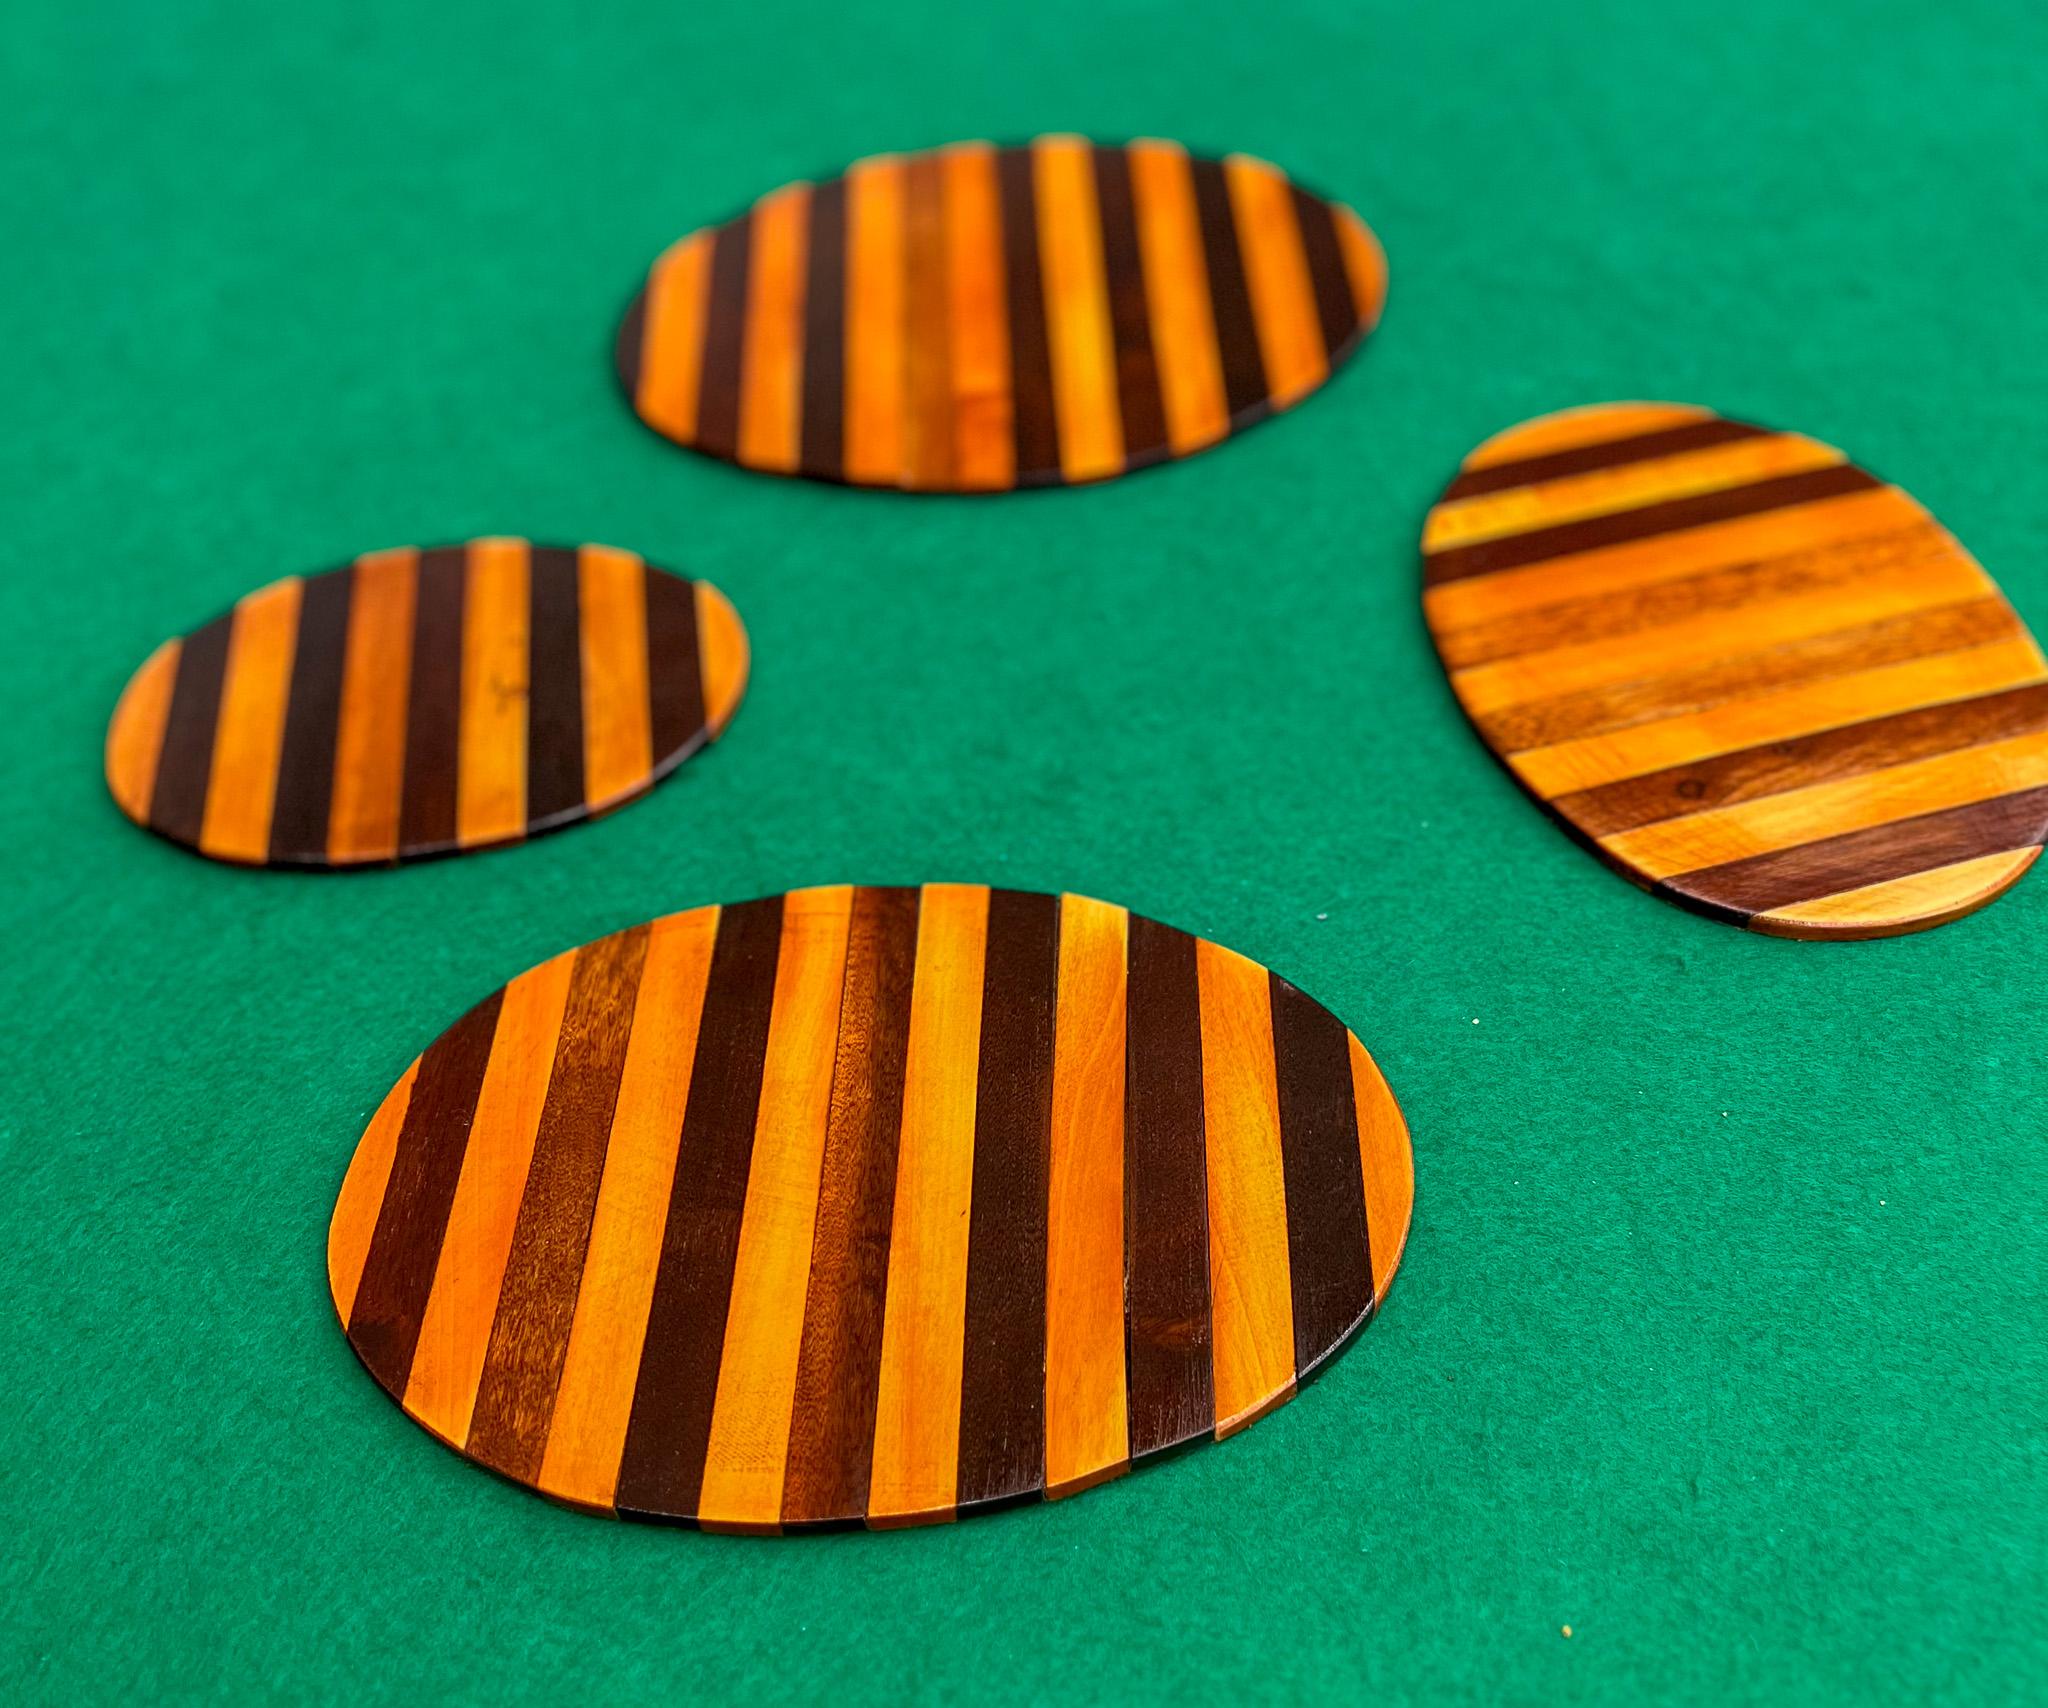 This set of four coasters are handcrafted with Brazilian rosewood (also known as jacaranda) and feature a beautiful design with clean lines. It has a striped pattern with a mix of light and dark brown rosewood. The wood has a deep, dark, and rich